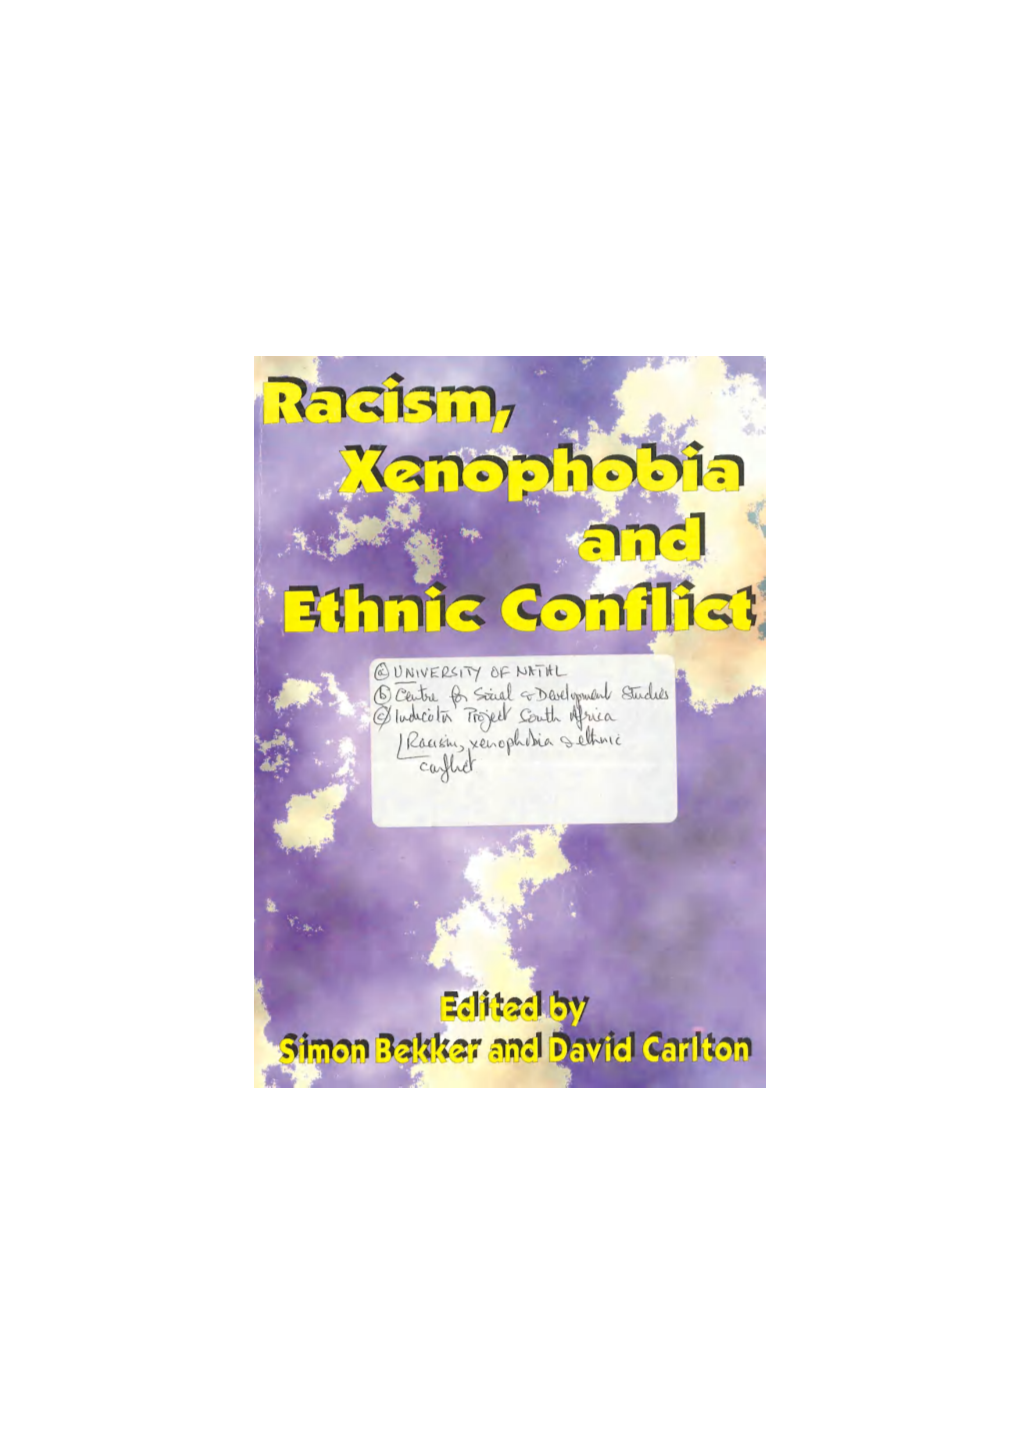 Racism, Xenophobia and Ethnic Conflict